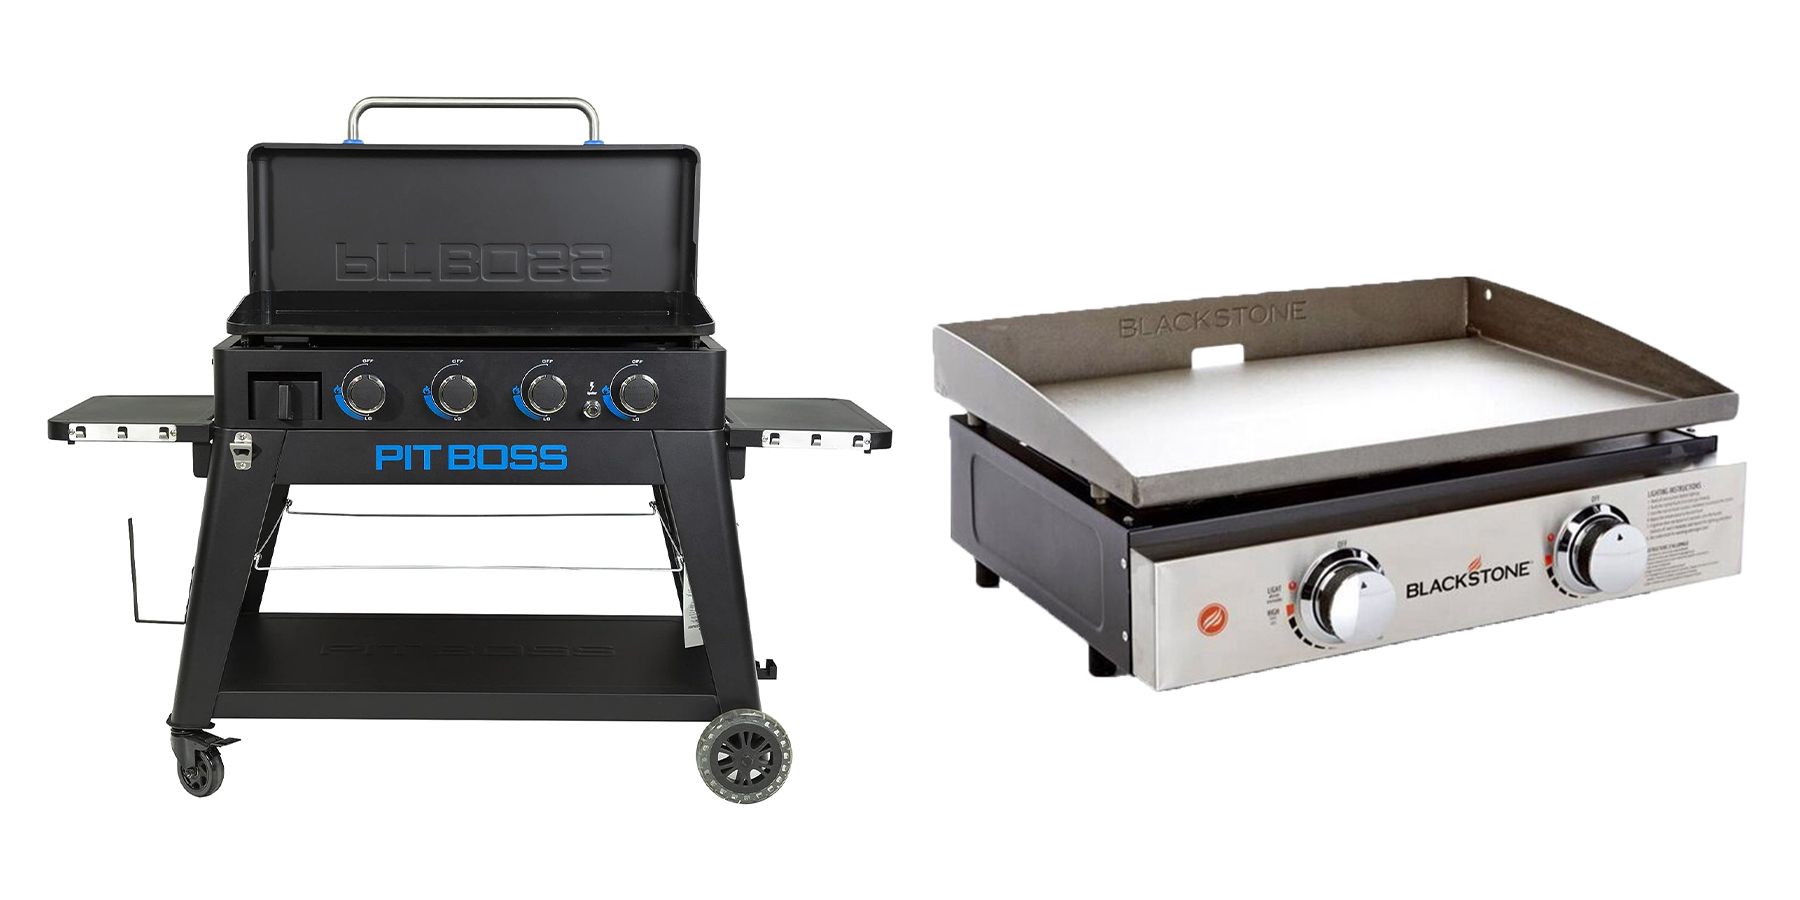 Pit Boss Tabletop Griddle Review: One and Two Burner Options